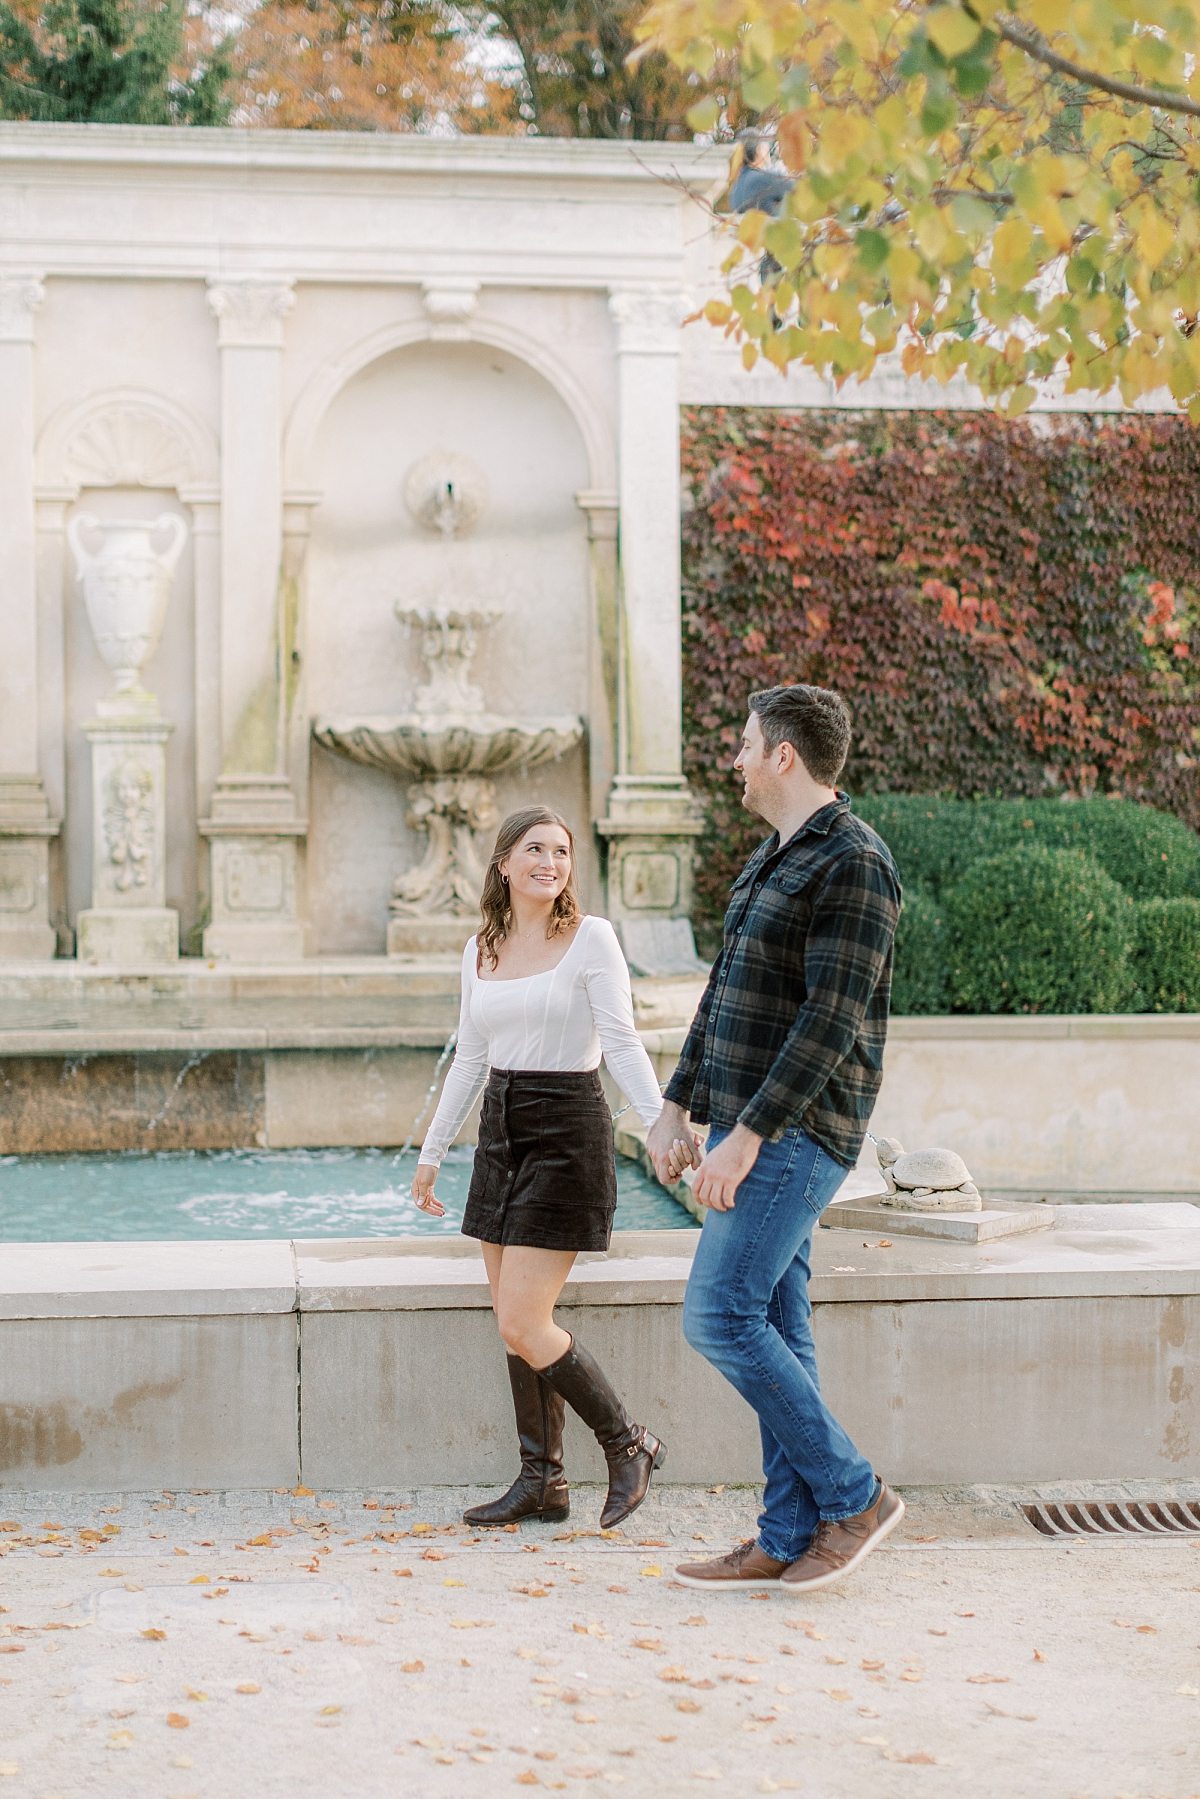 Fall Longwood Gardens engagement session by the fountain pond